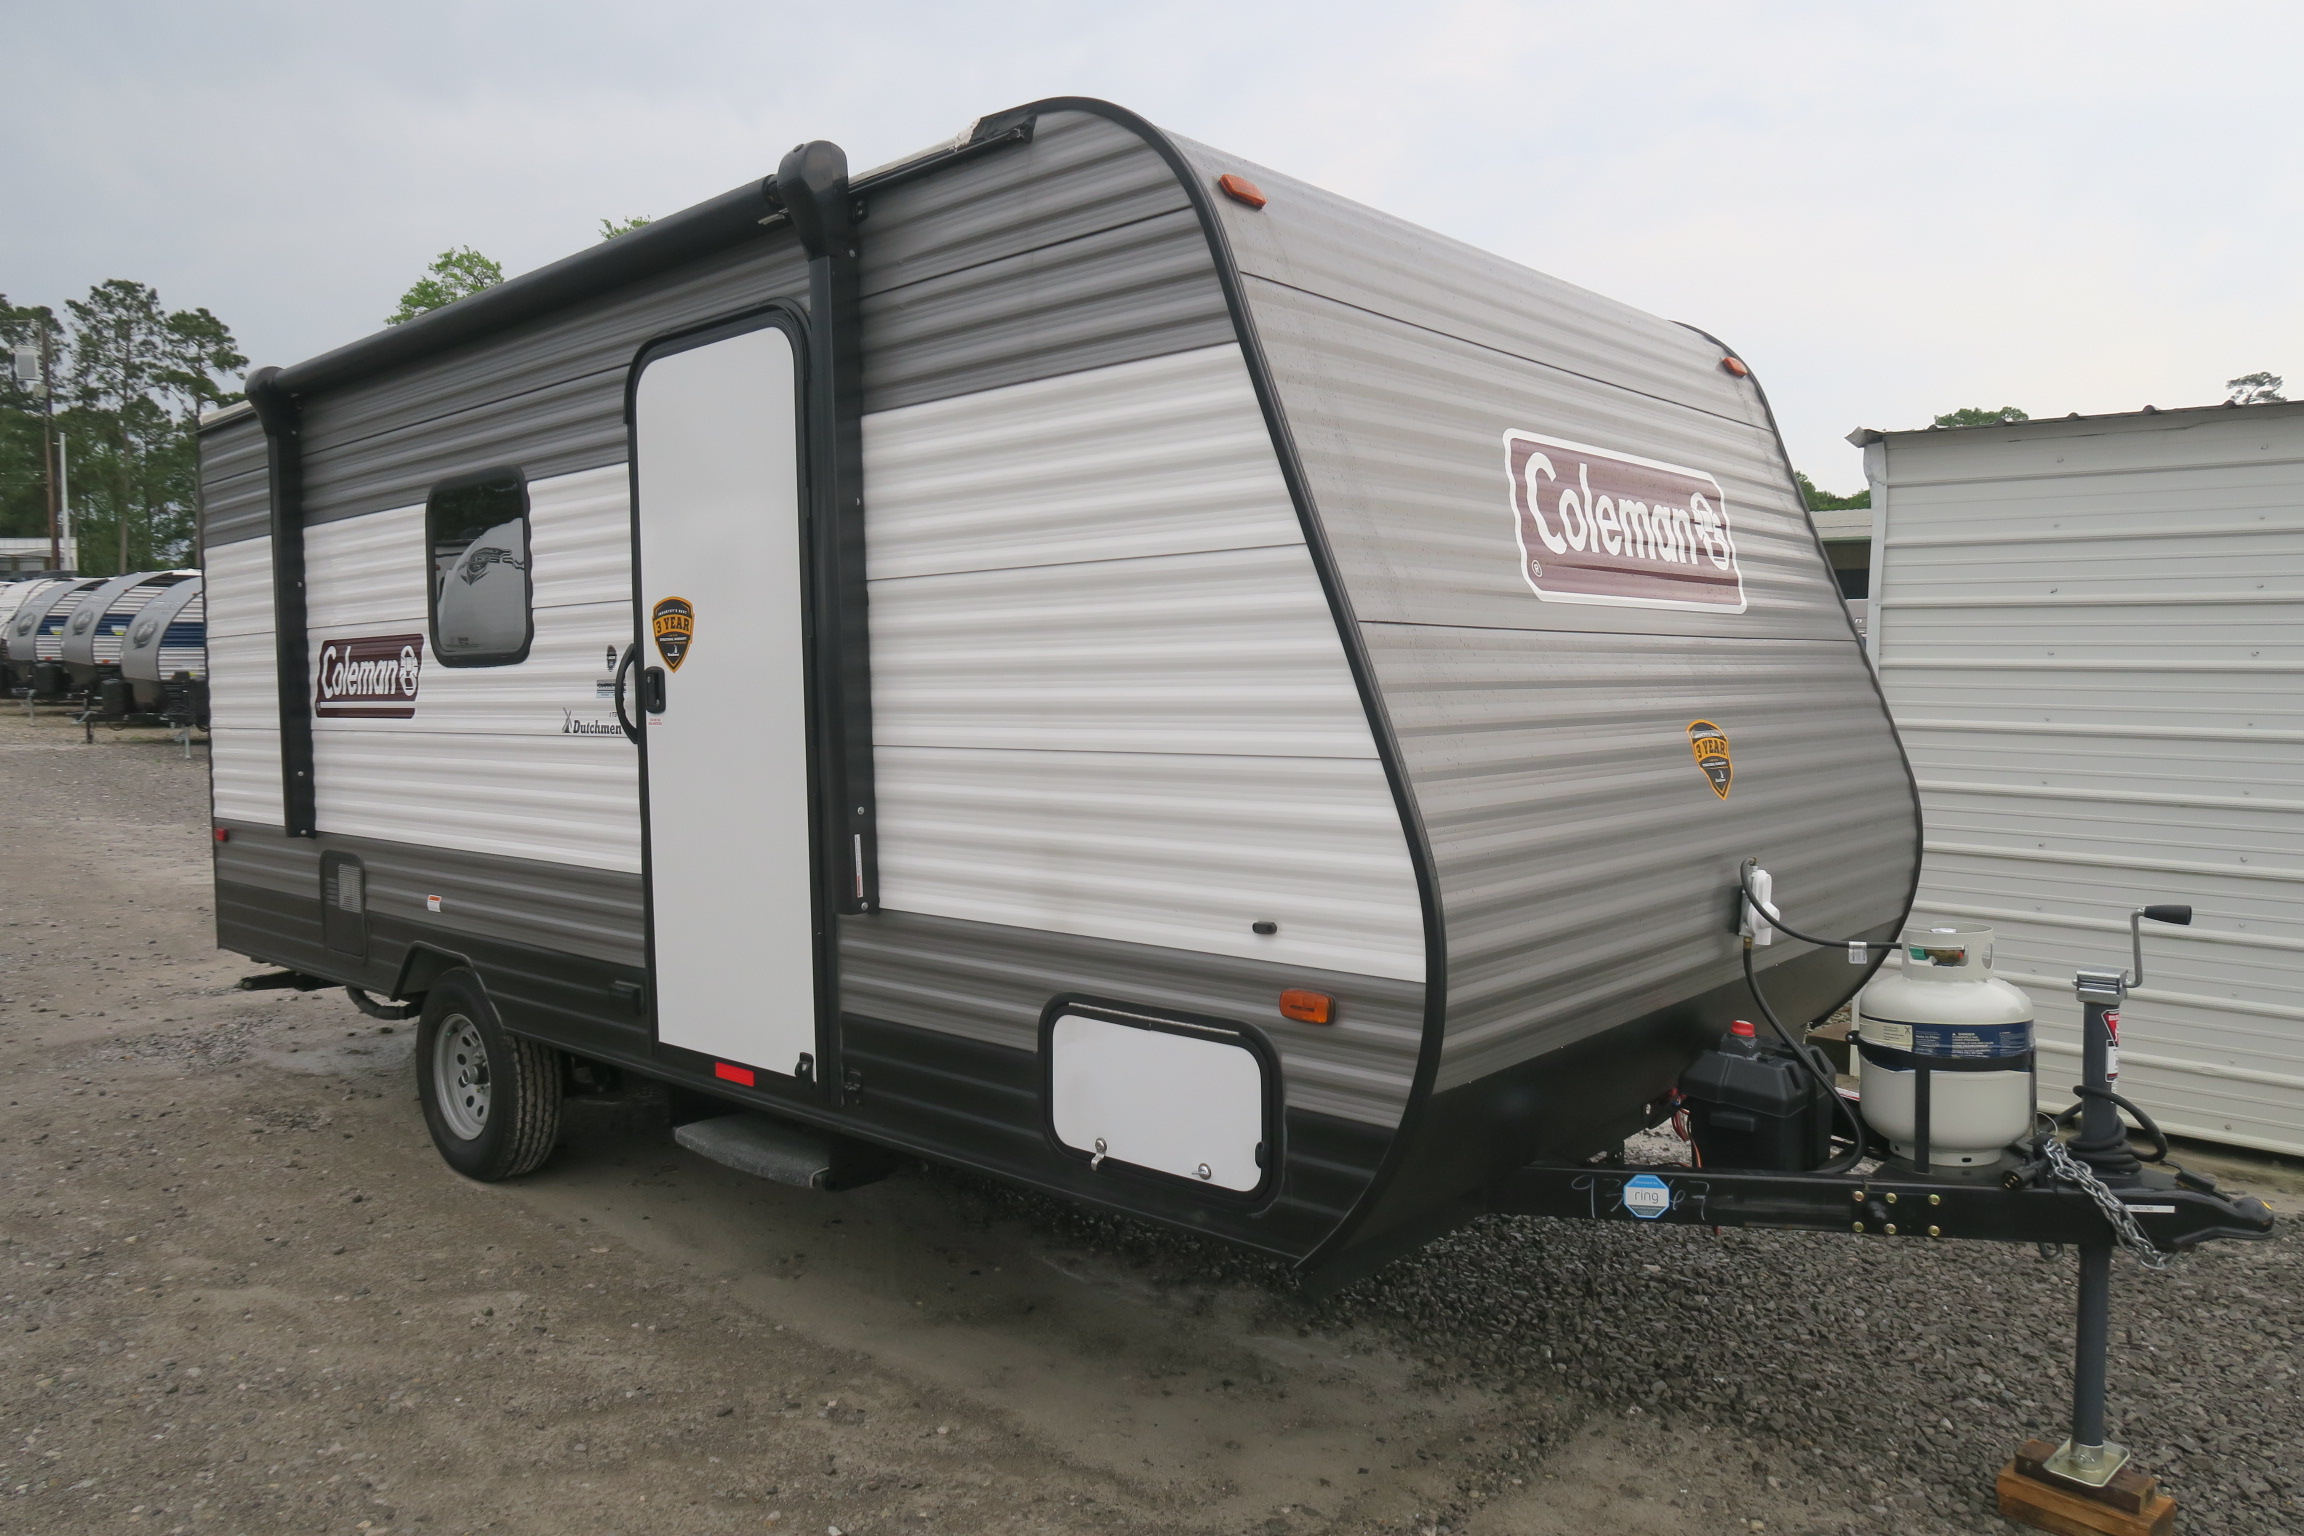 coleman travel trailers near me